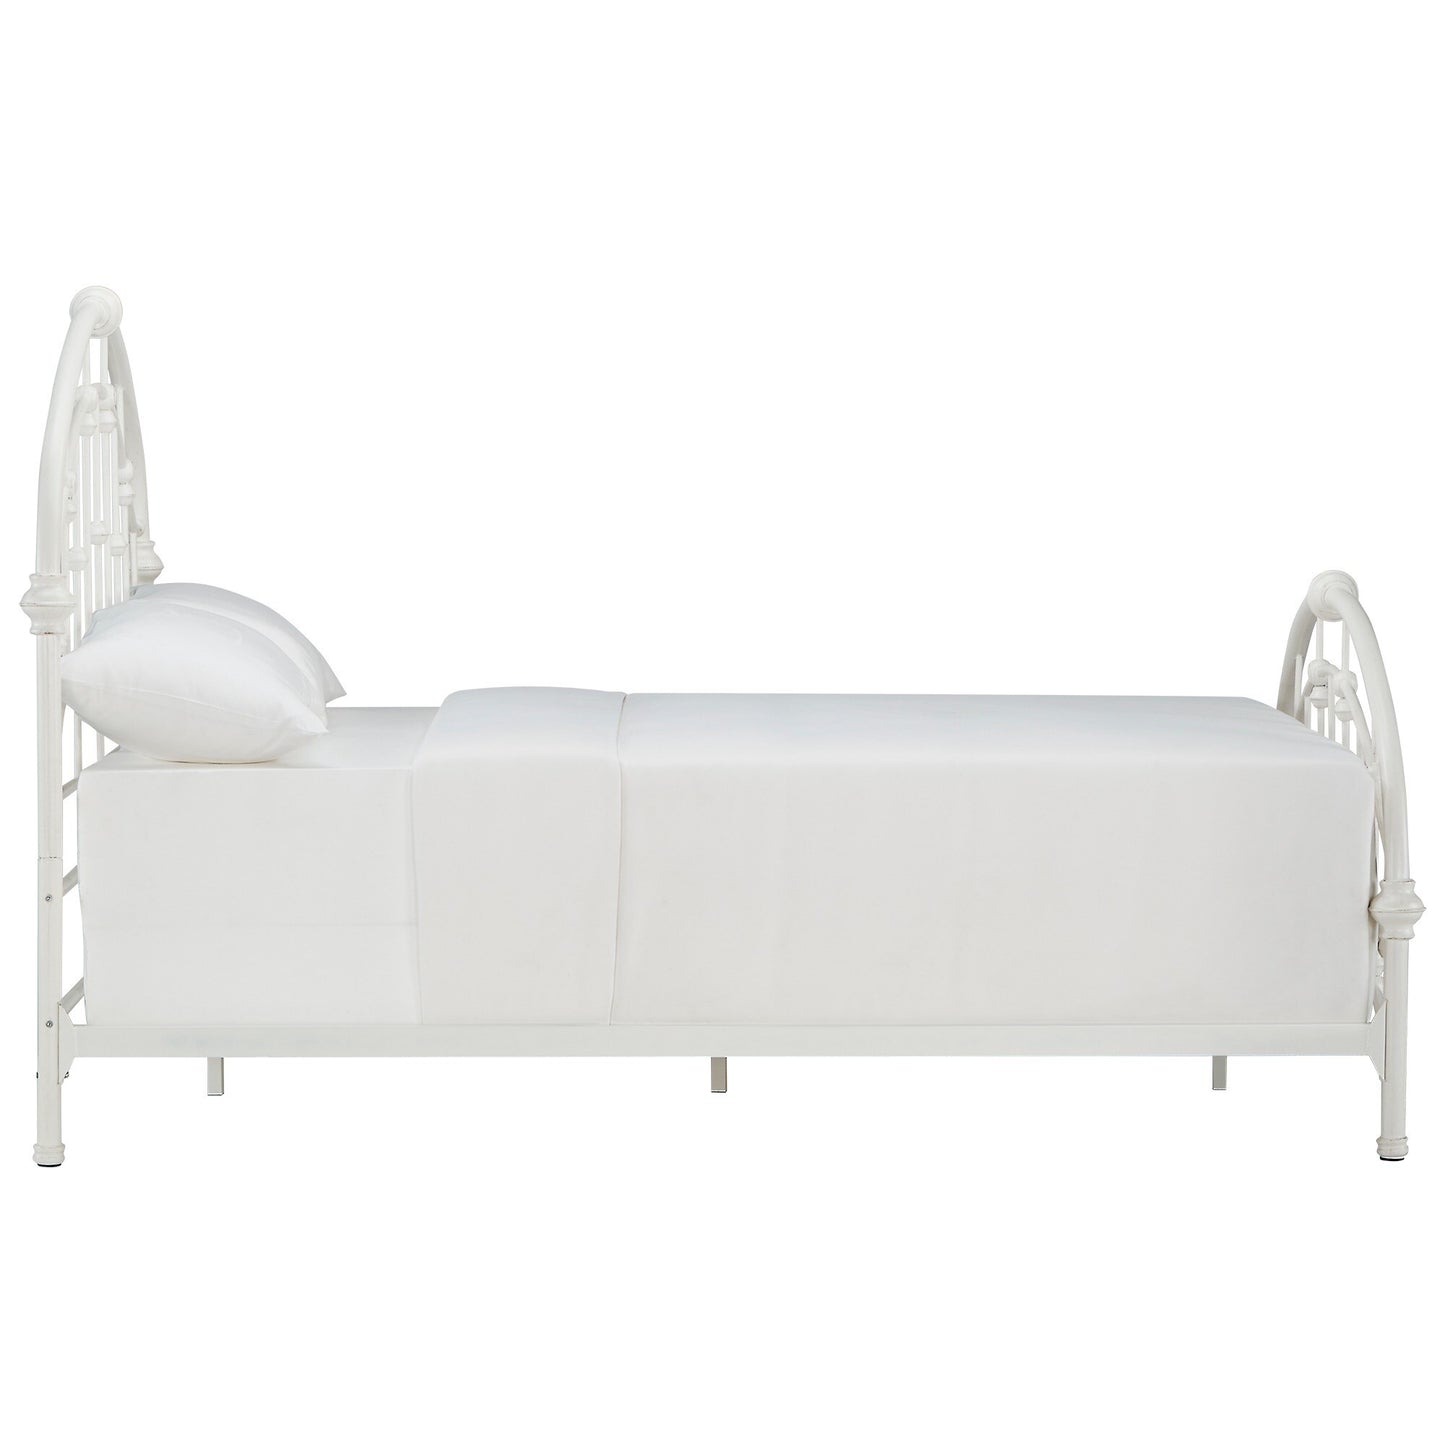 Curved Double Top Arches Victorian Iron Bed - Antique White, Full Size